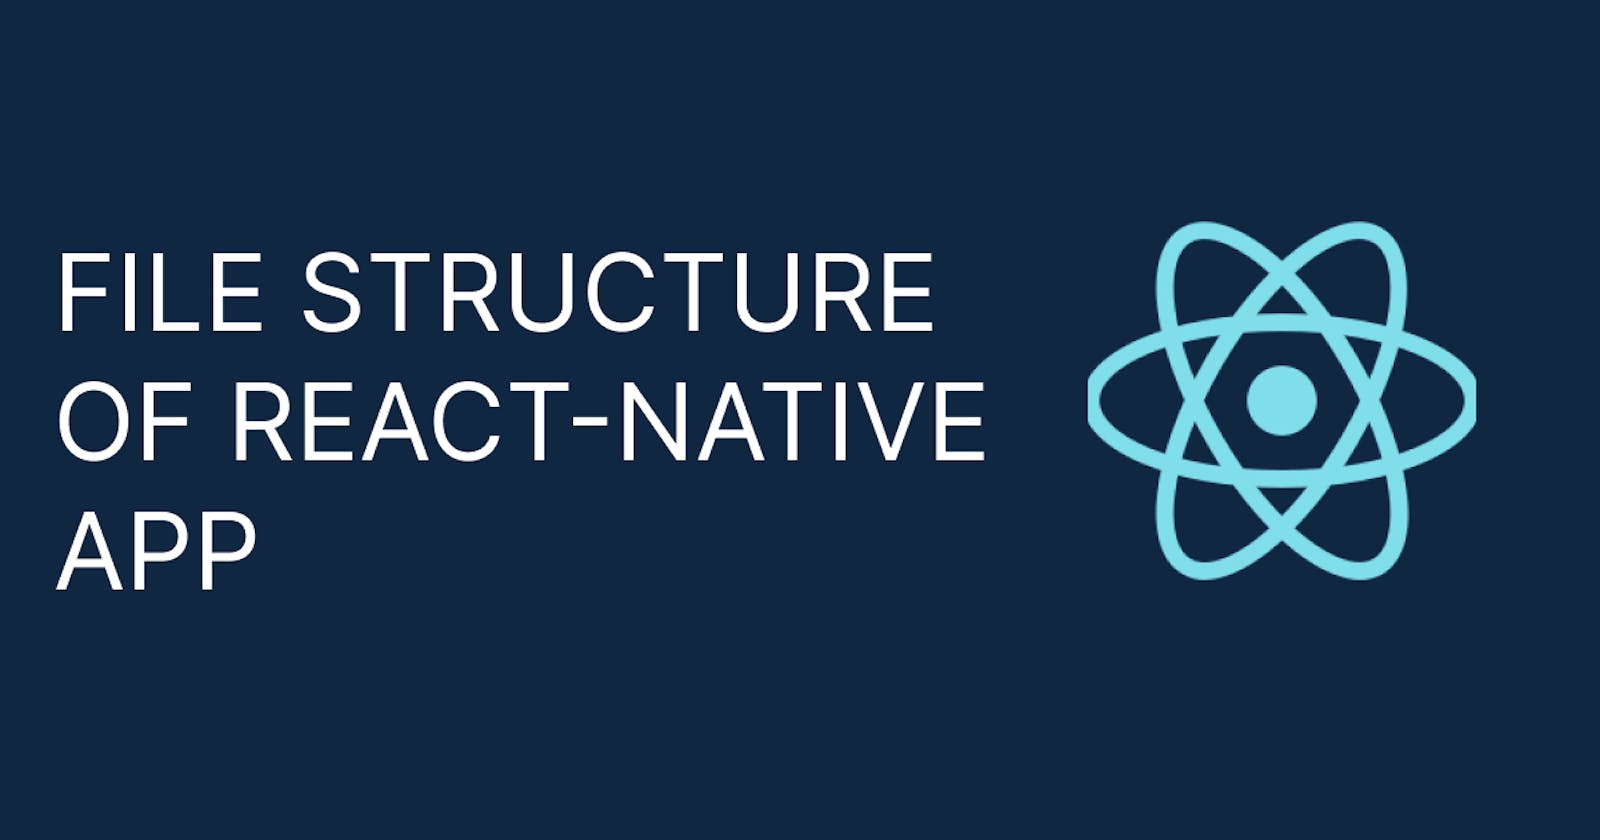 File structure of react-native app